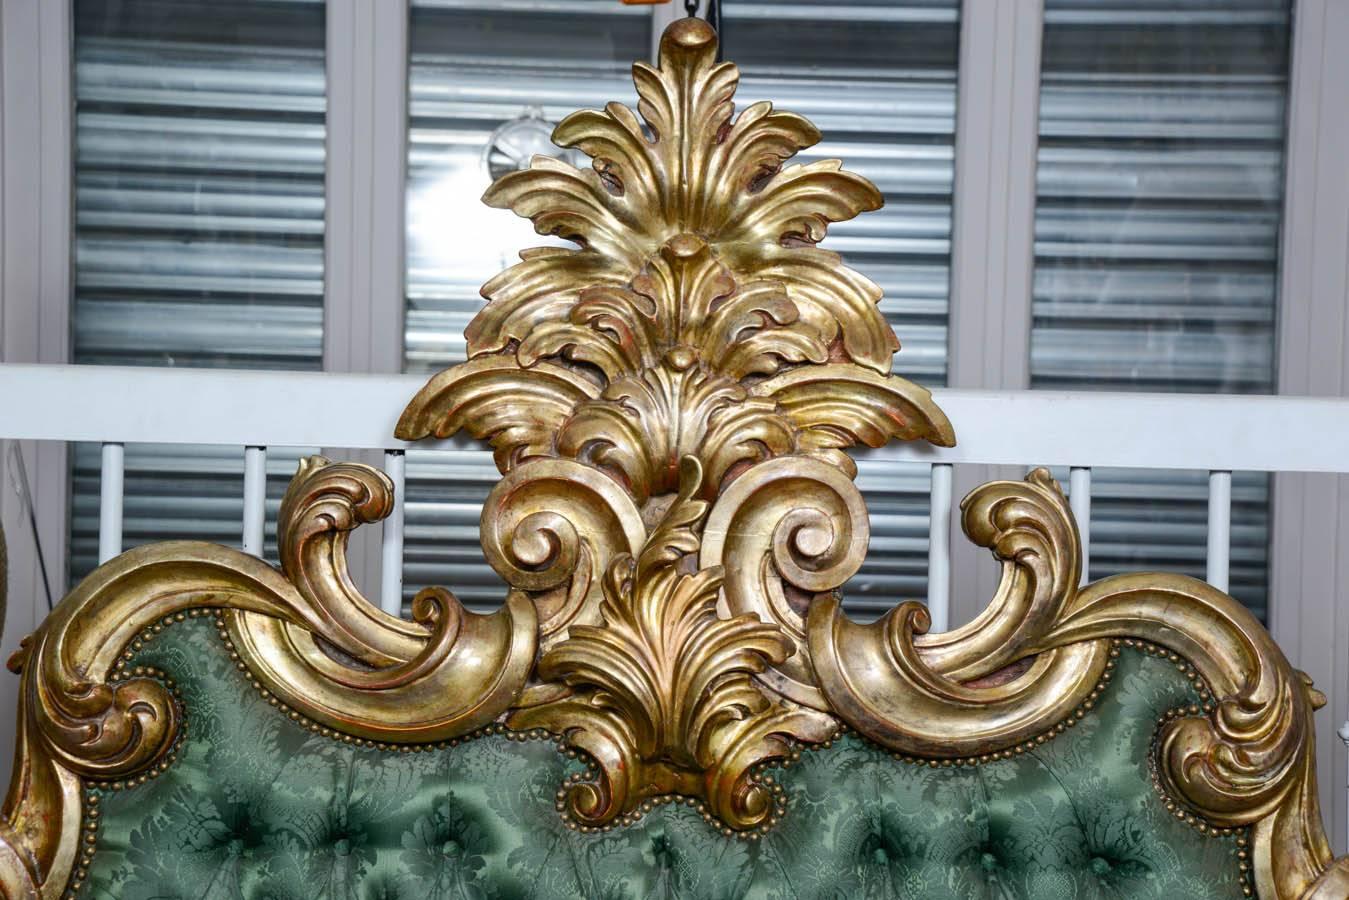 Head-bed in gilded wood, with original fabric ( need to be changed) 
Baroque style.